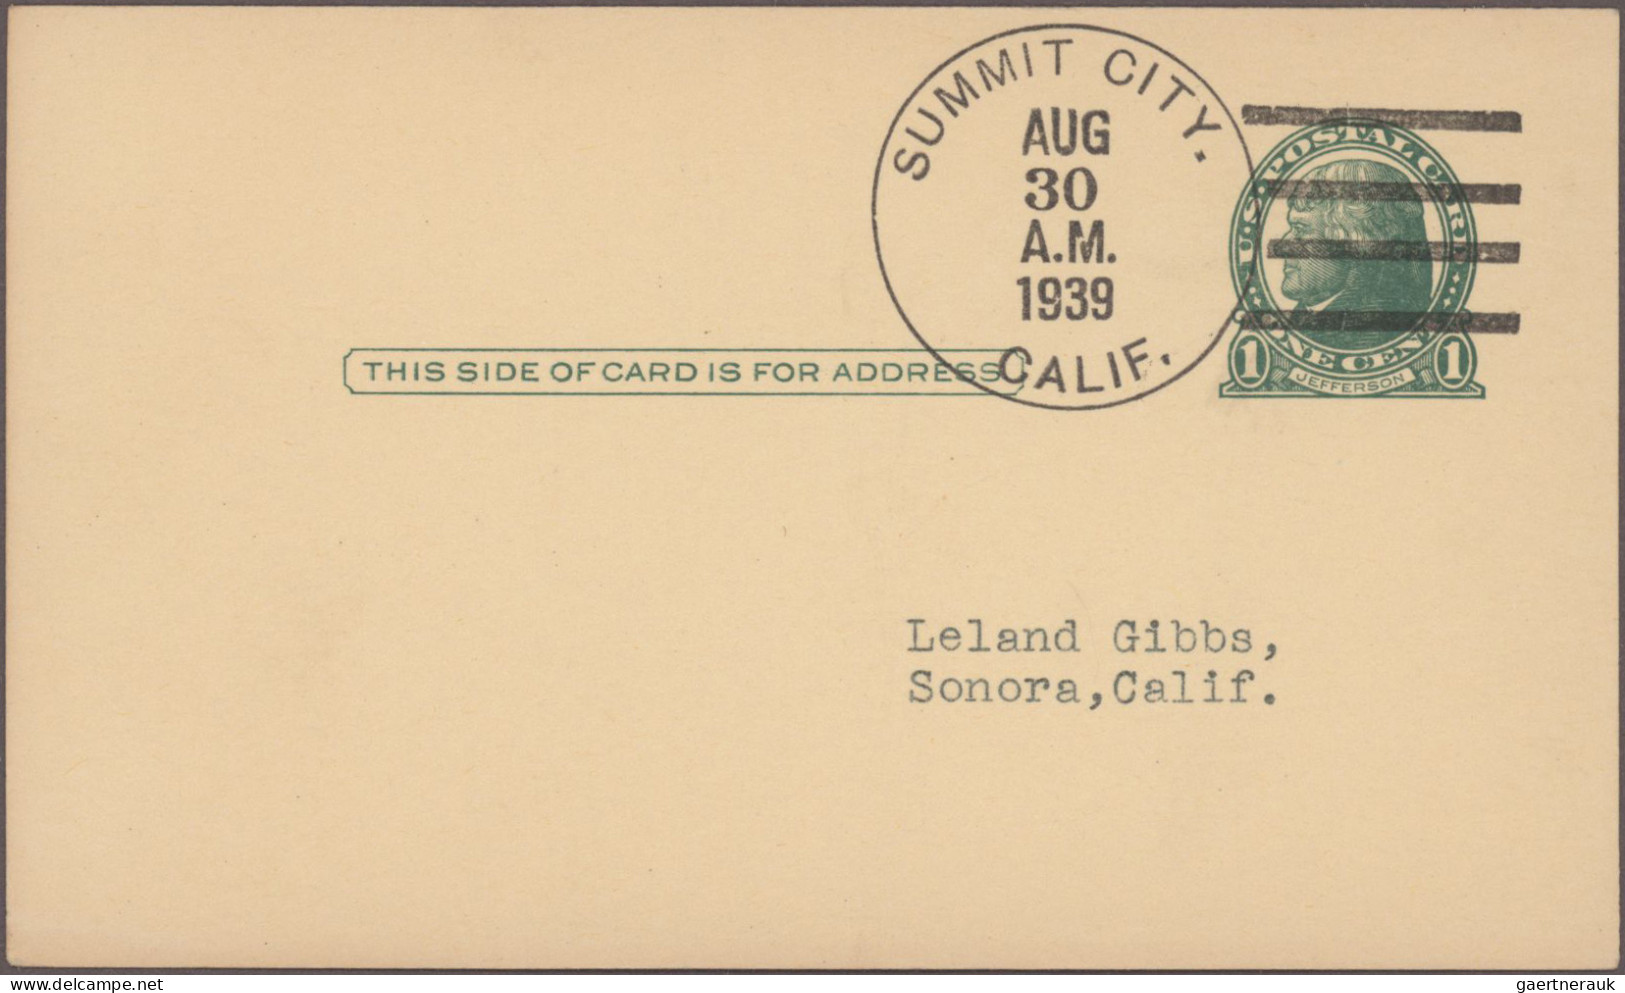 United States of America - post marks: 1937/1968, Postmarks of California, colle